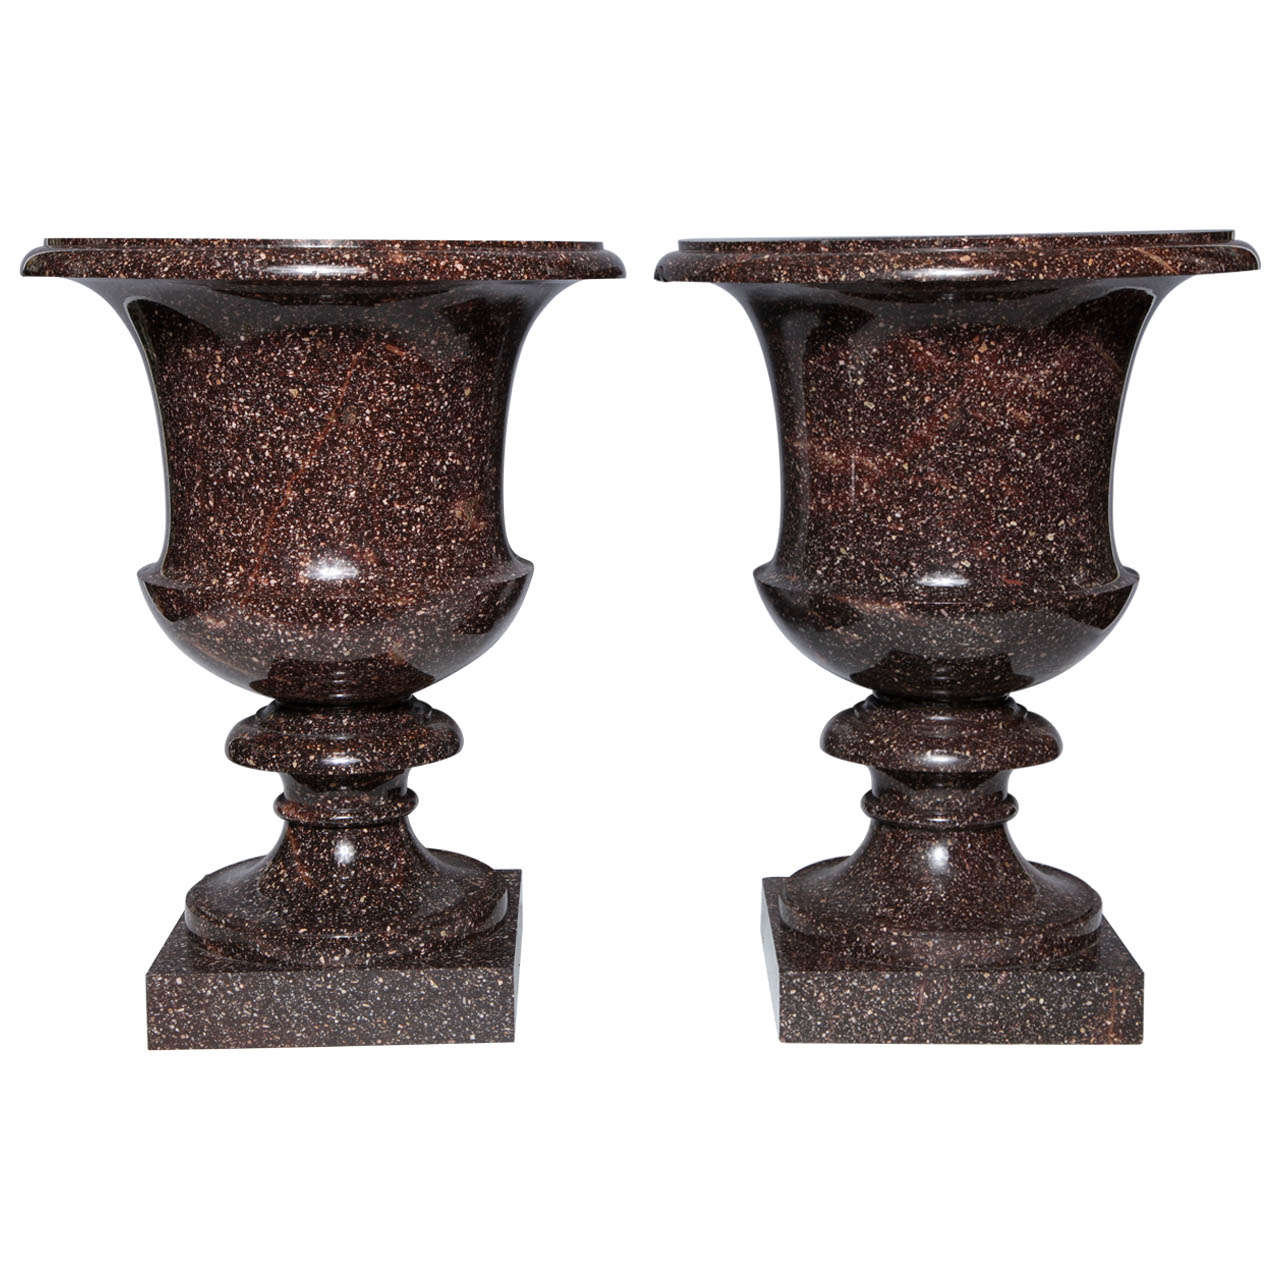 Monumental Pair of Neoclassical Period, Swedish Porphyry Campagna Shaped Vases